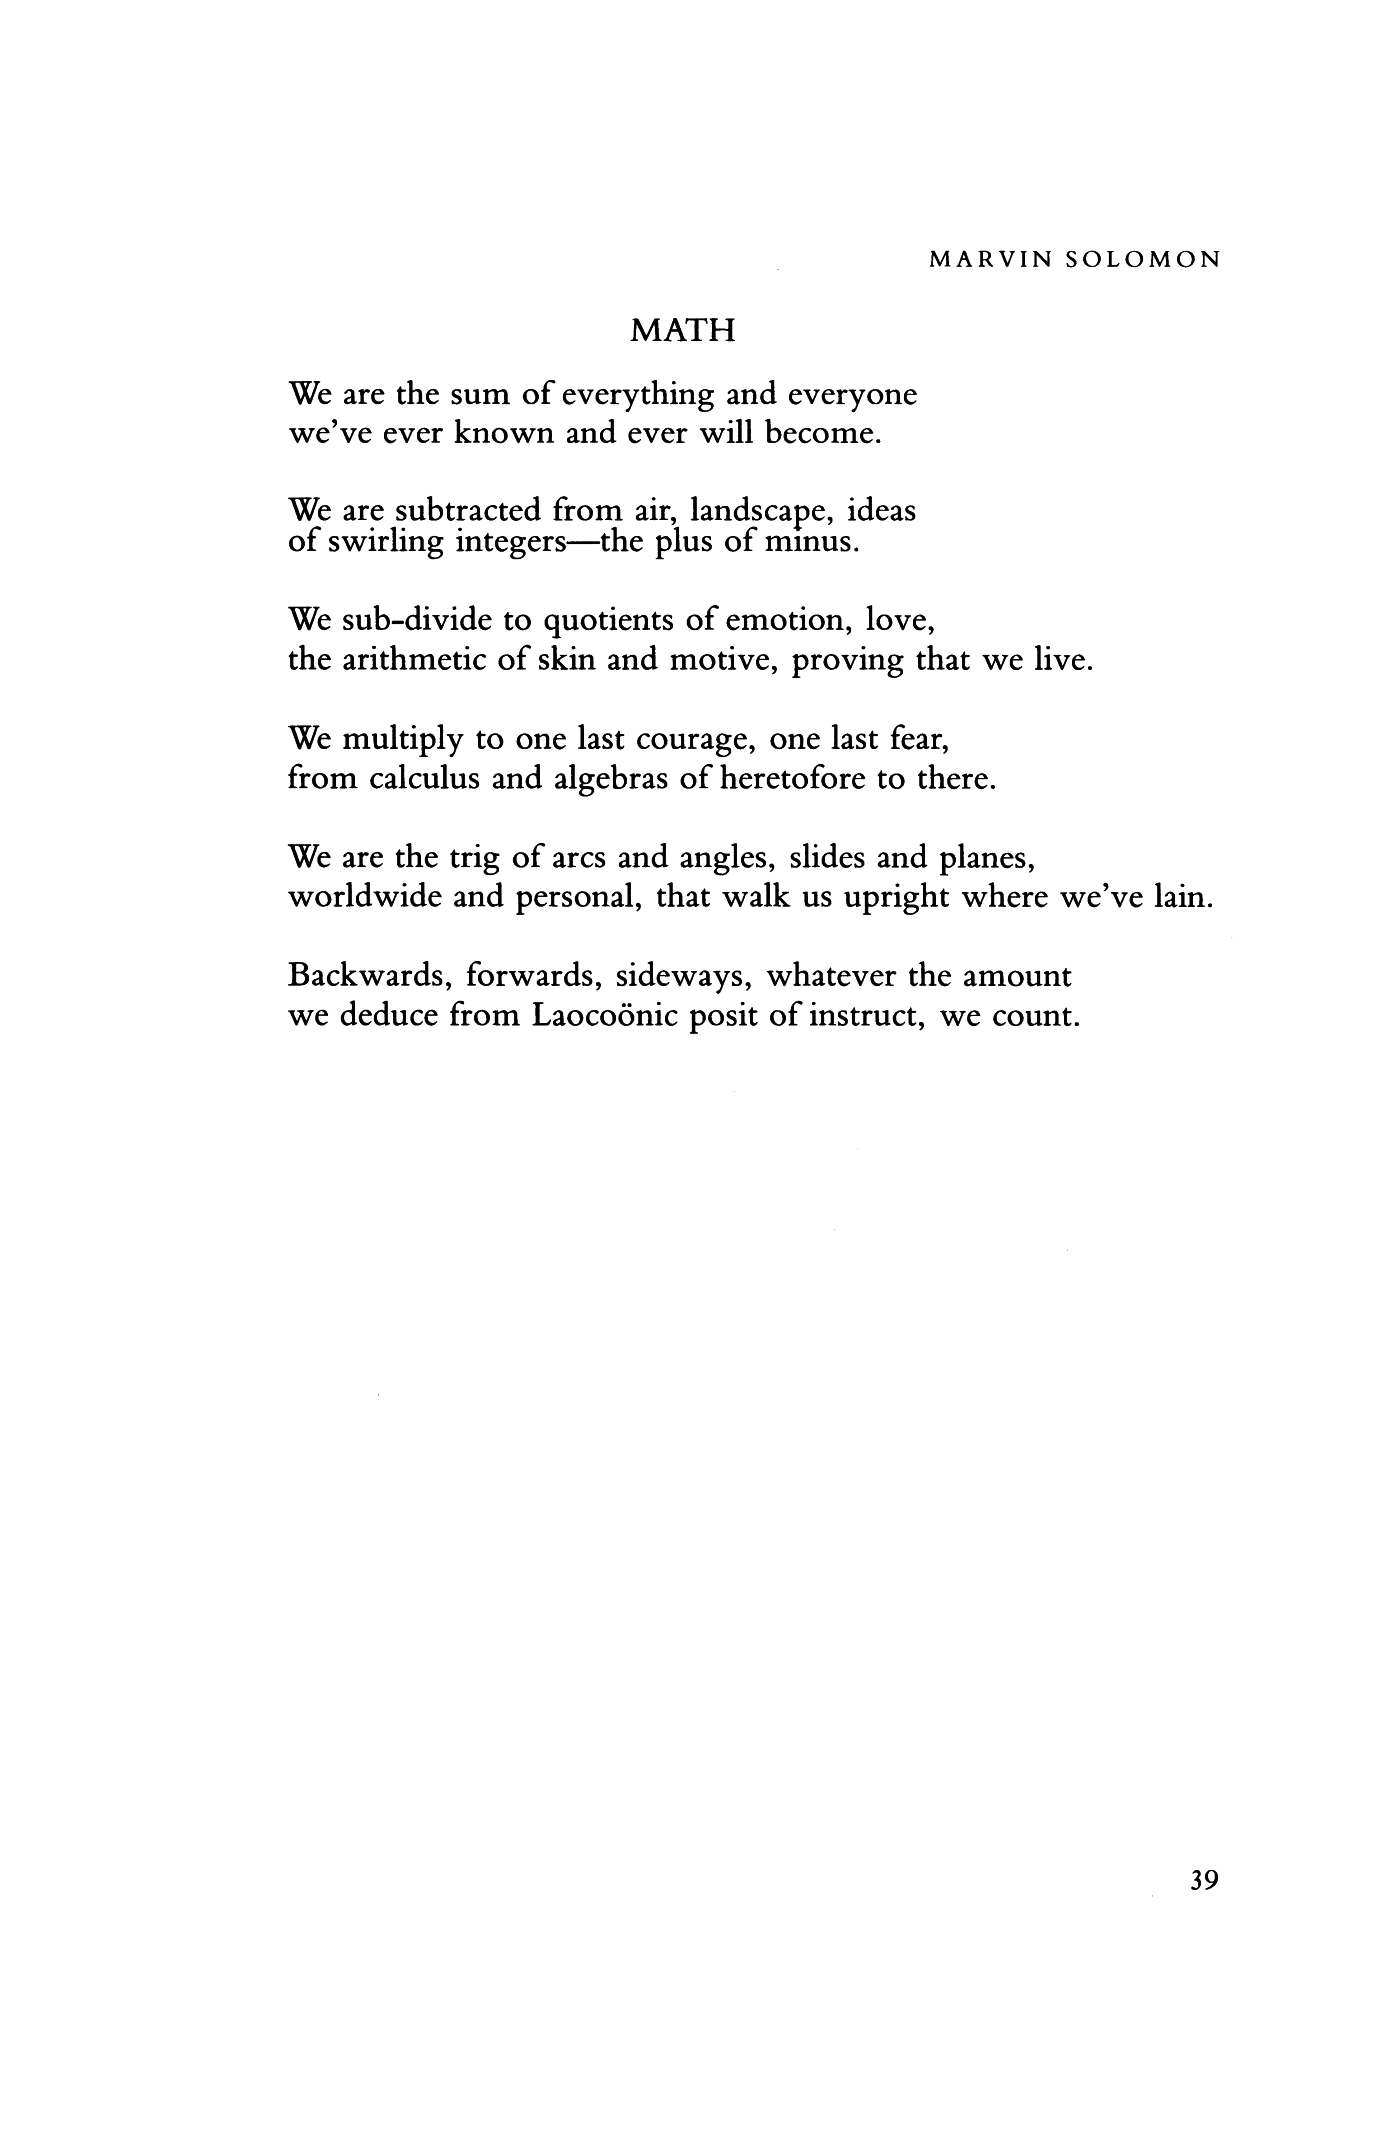 a poem relating to math